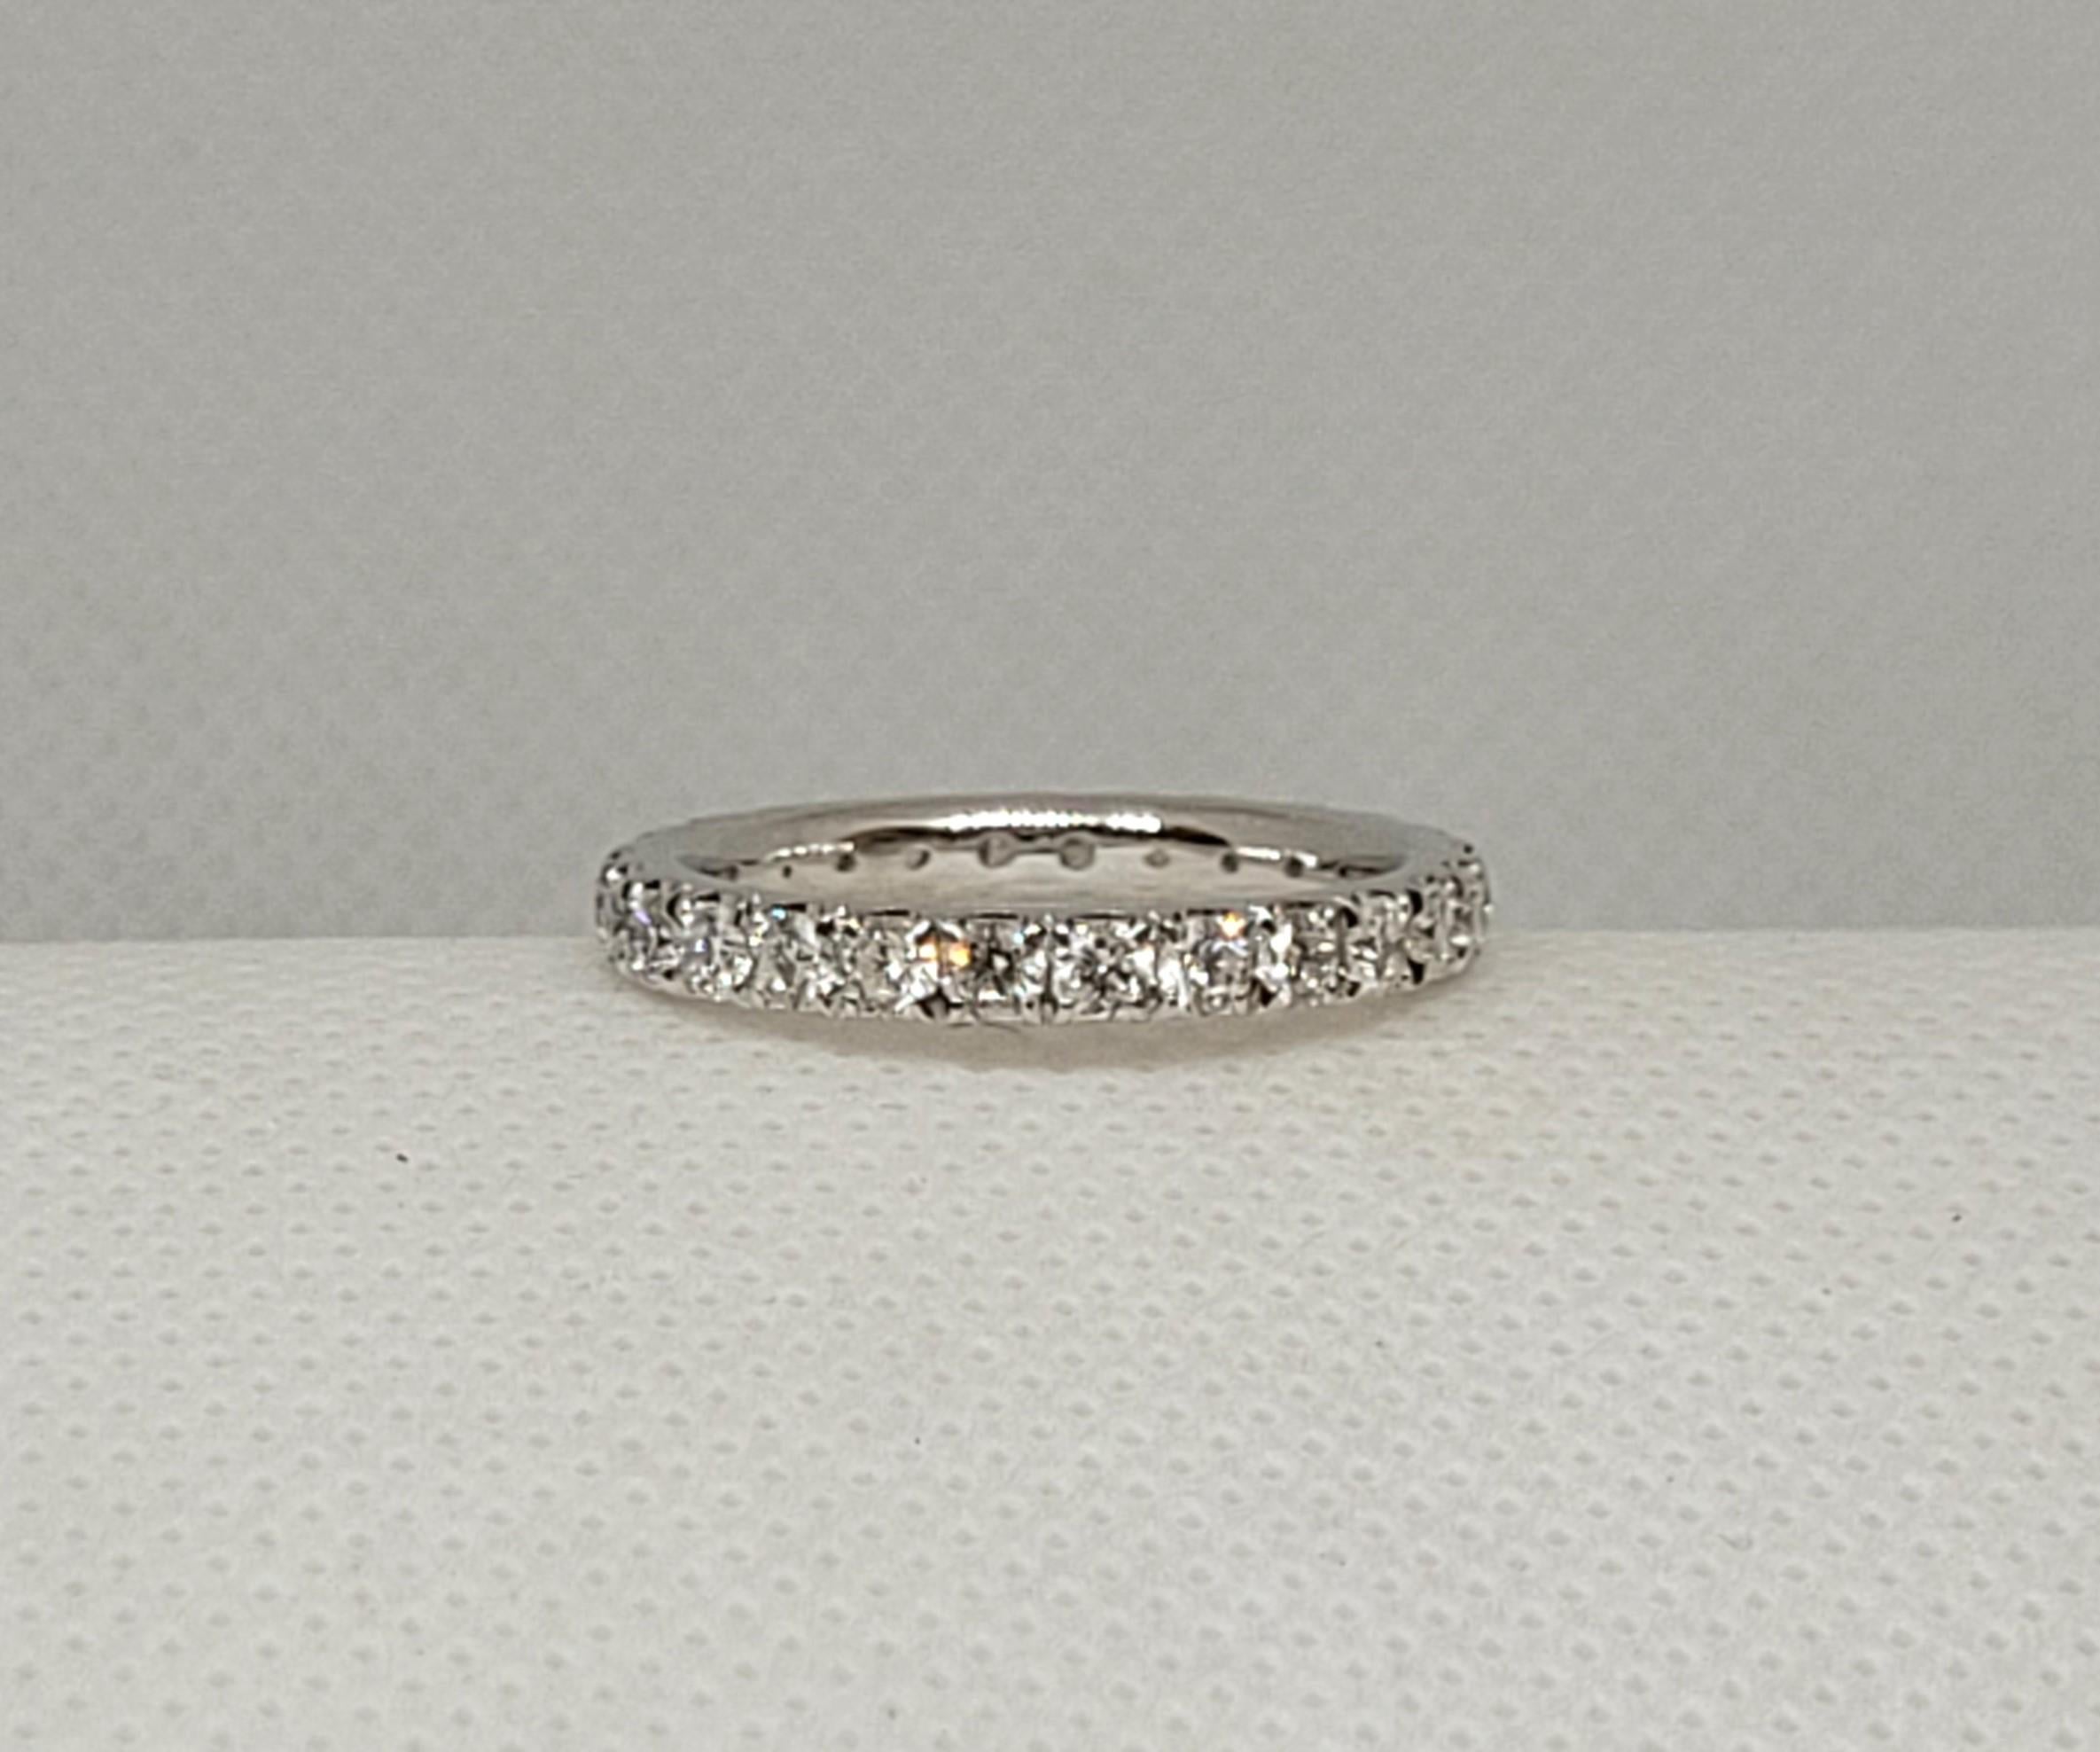 Gorgeous 14kt white gold eternity ring with 26 round brilliant diamonds of approximately .88cttw. The prong set diamonds are F/G in color, SI/VS in clarity, and well cut. The ring is 2.73mm wide, comfort-fit inside, 3 grams, size 6.5, and in very